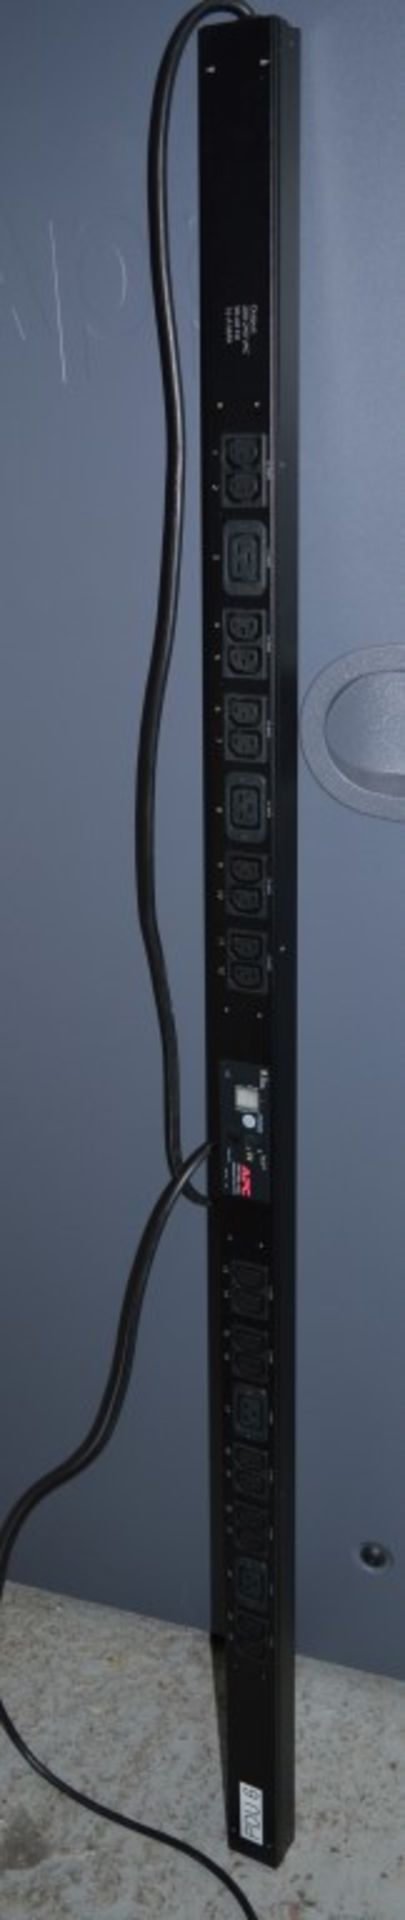 1 x APC Metered Rack PDU - Model AP7852 - 230V 16A - Features 24 Output Connectors - CL106 - Removed - Image 6 of 7